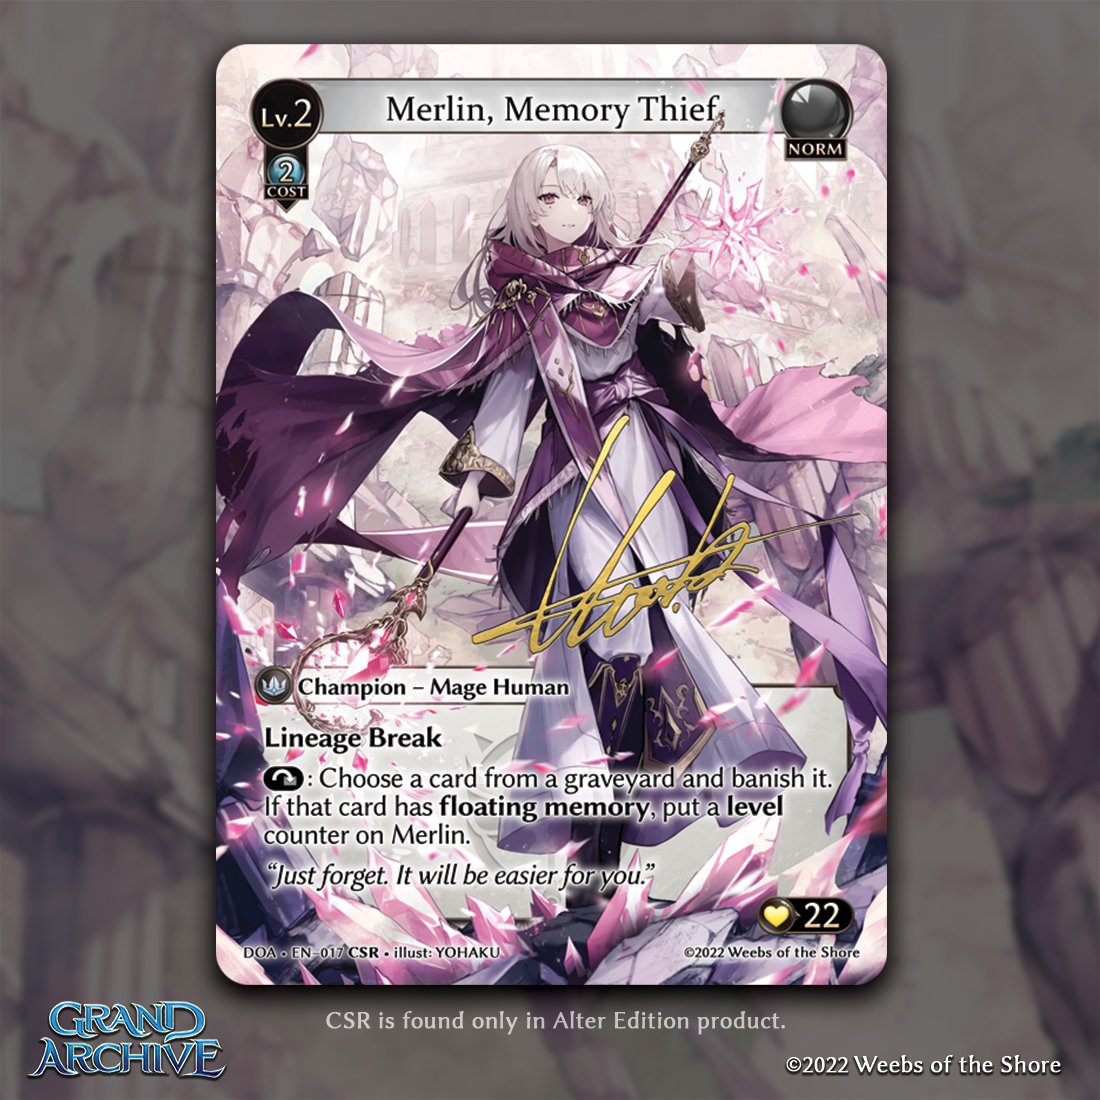 The Alter Edition Merlin collector super rare from Grand Archive's Twitter feed.